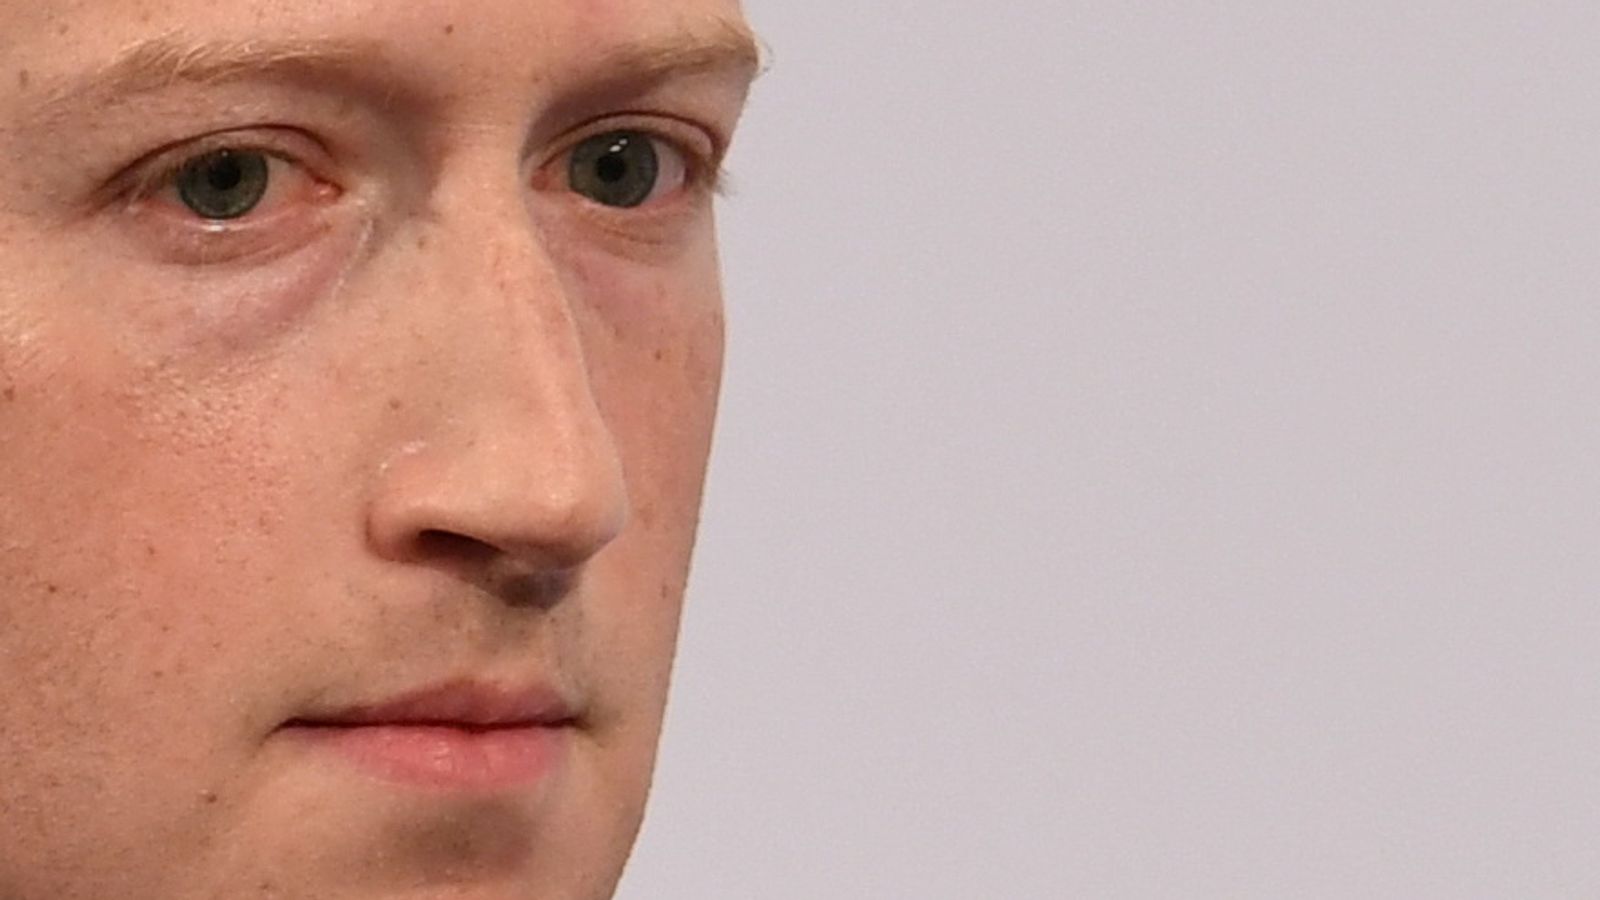 Facebook hit by election interference content '10 years before Zuckerberg acknowledged it'